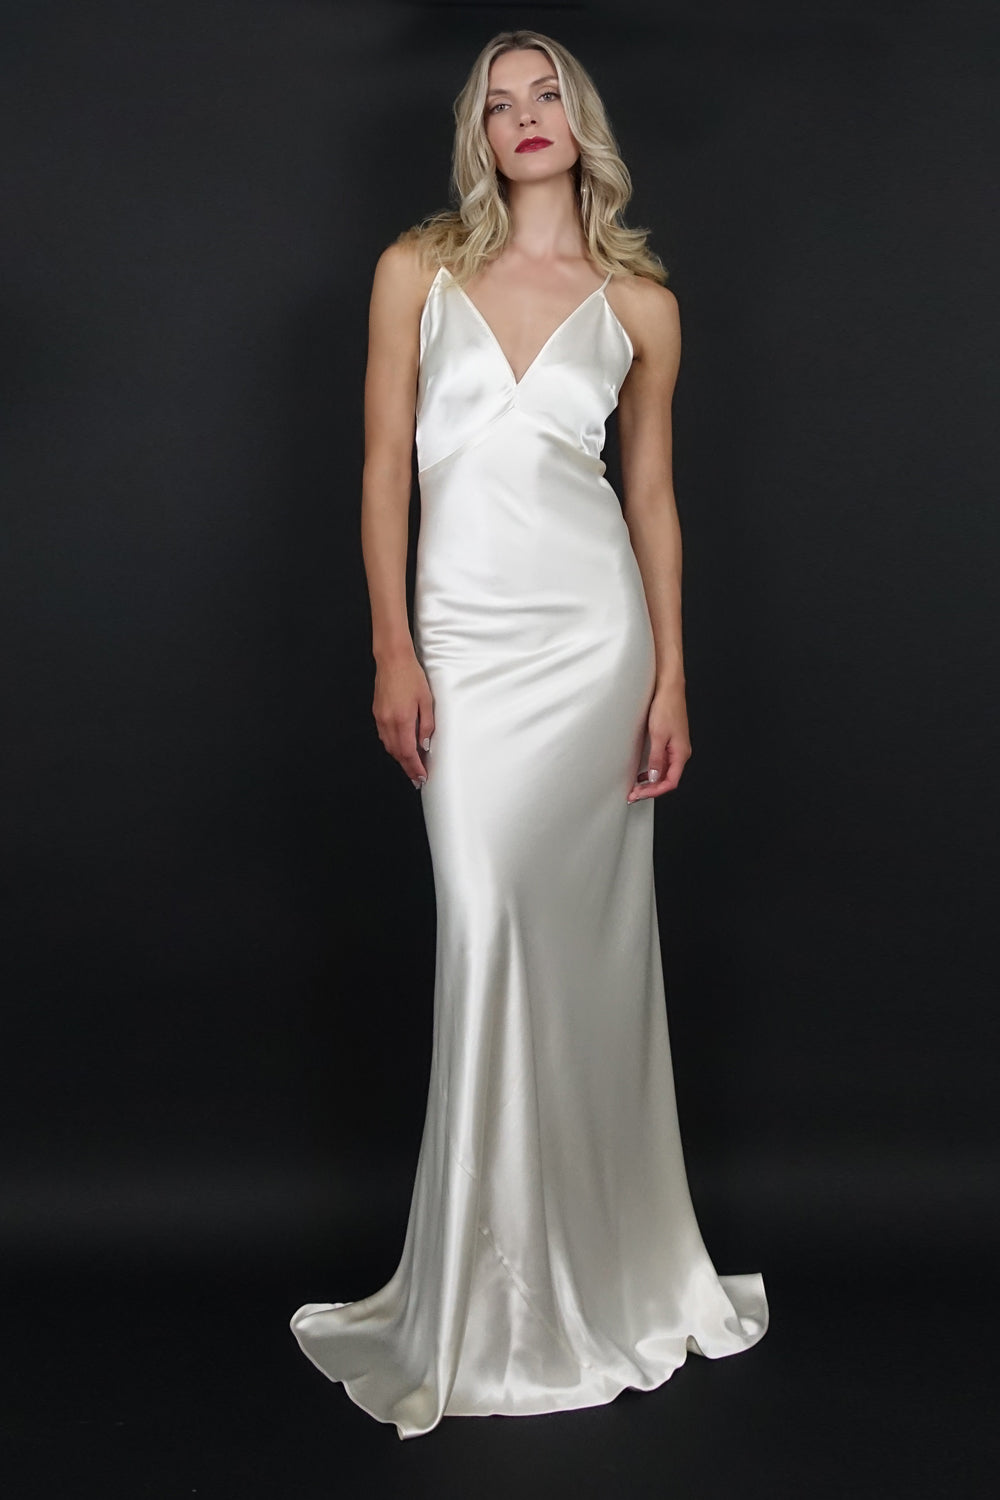 The Classic Wedding Gown | Silver Moon – Silver Moon